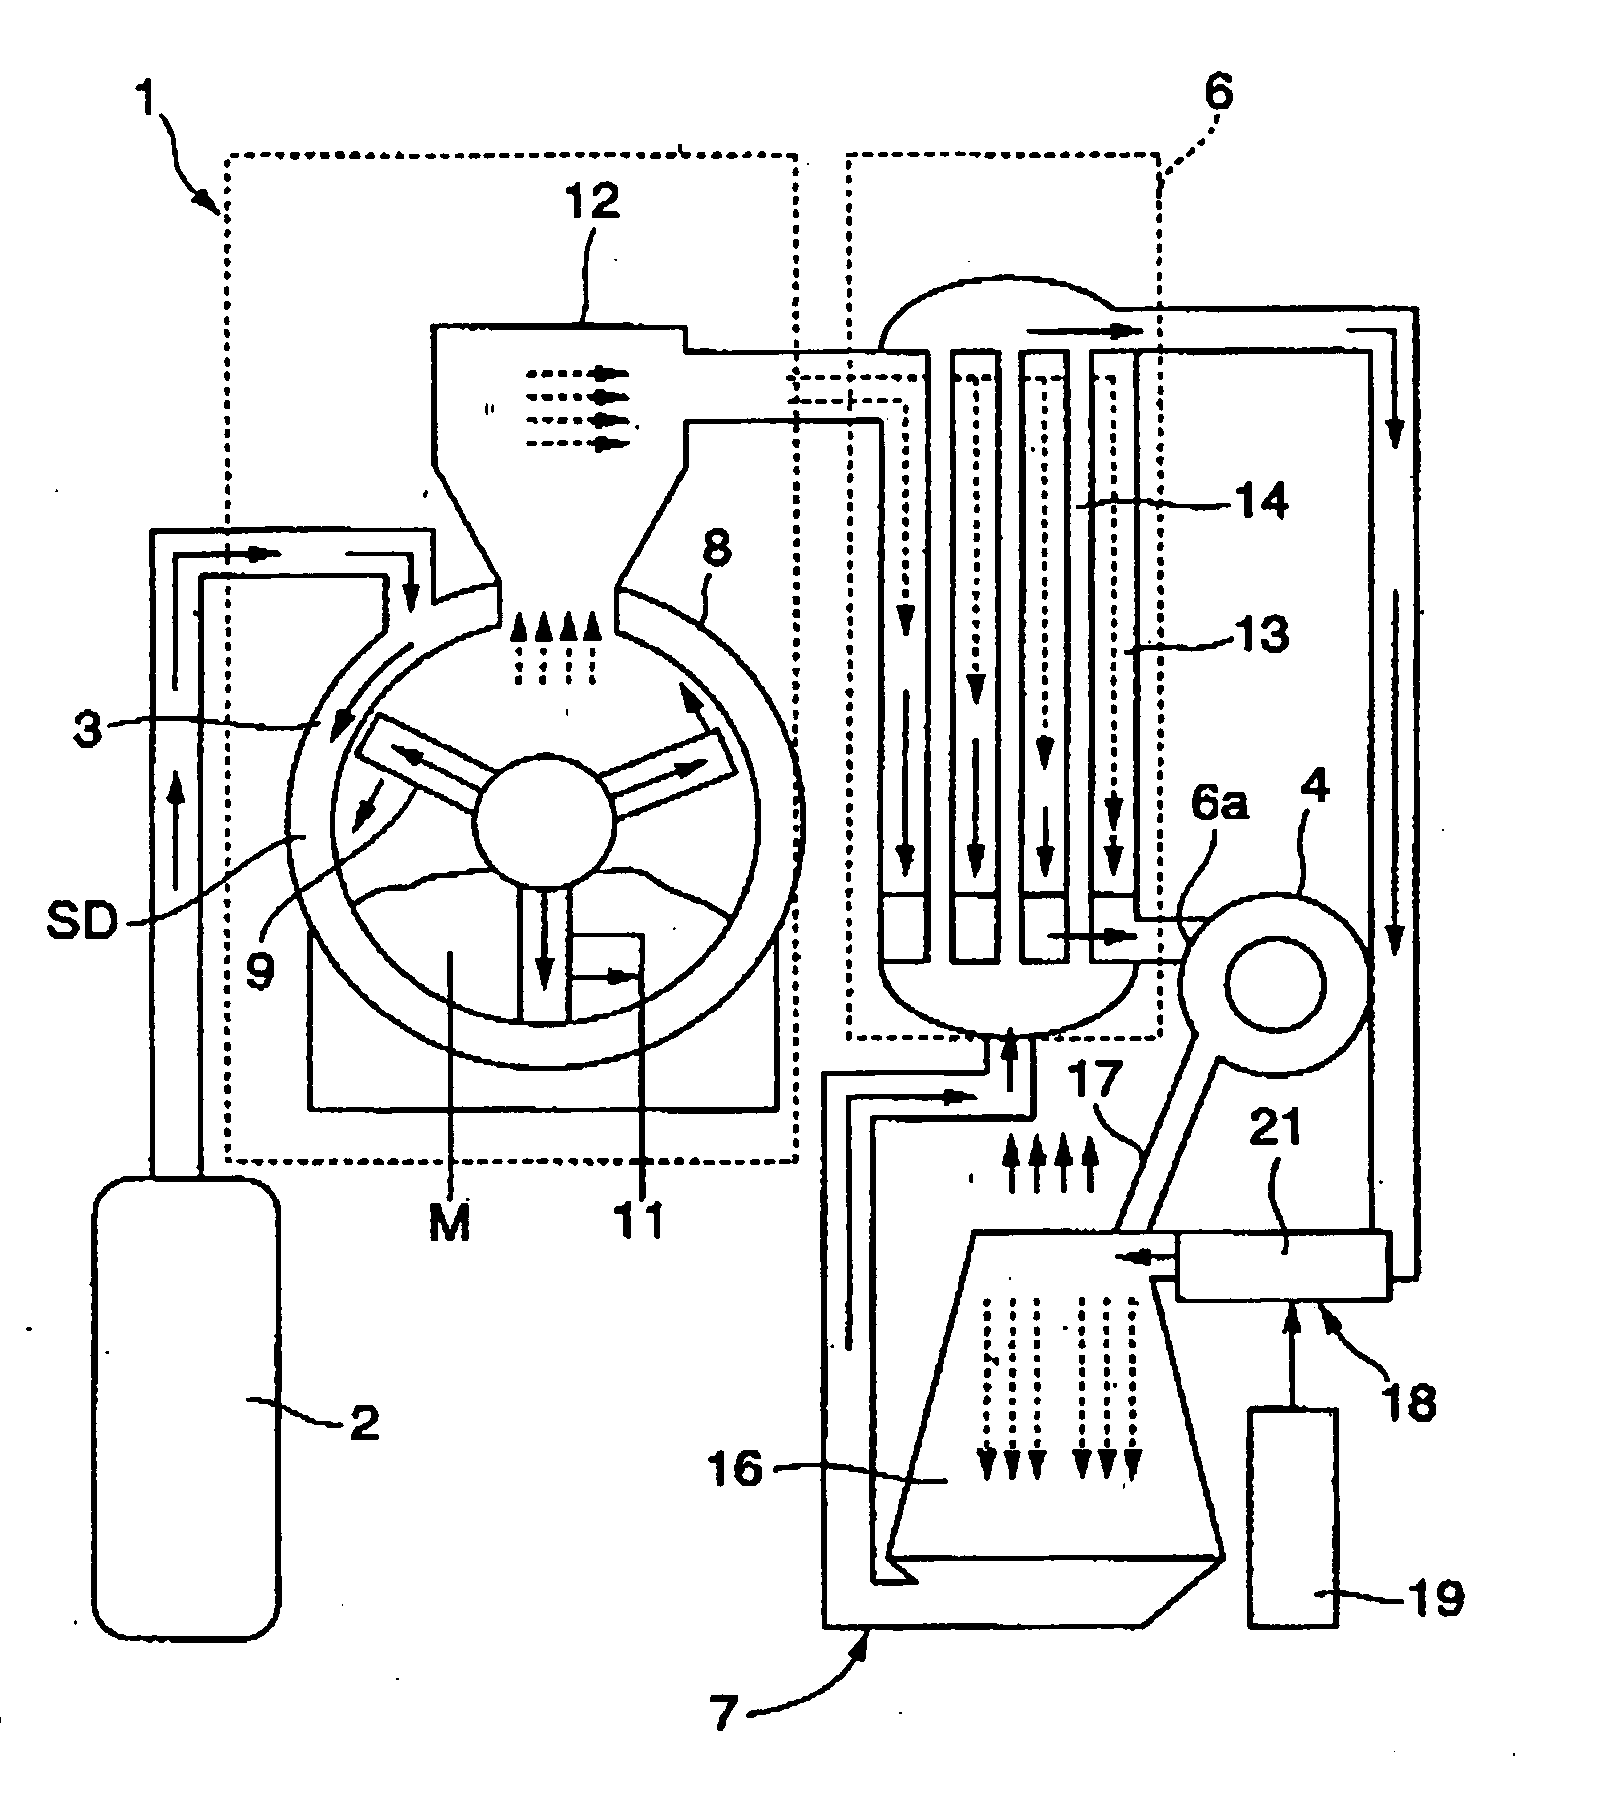 Method and apparatus for producing organic fertilizer